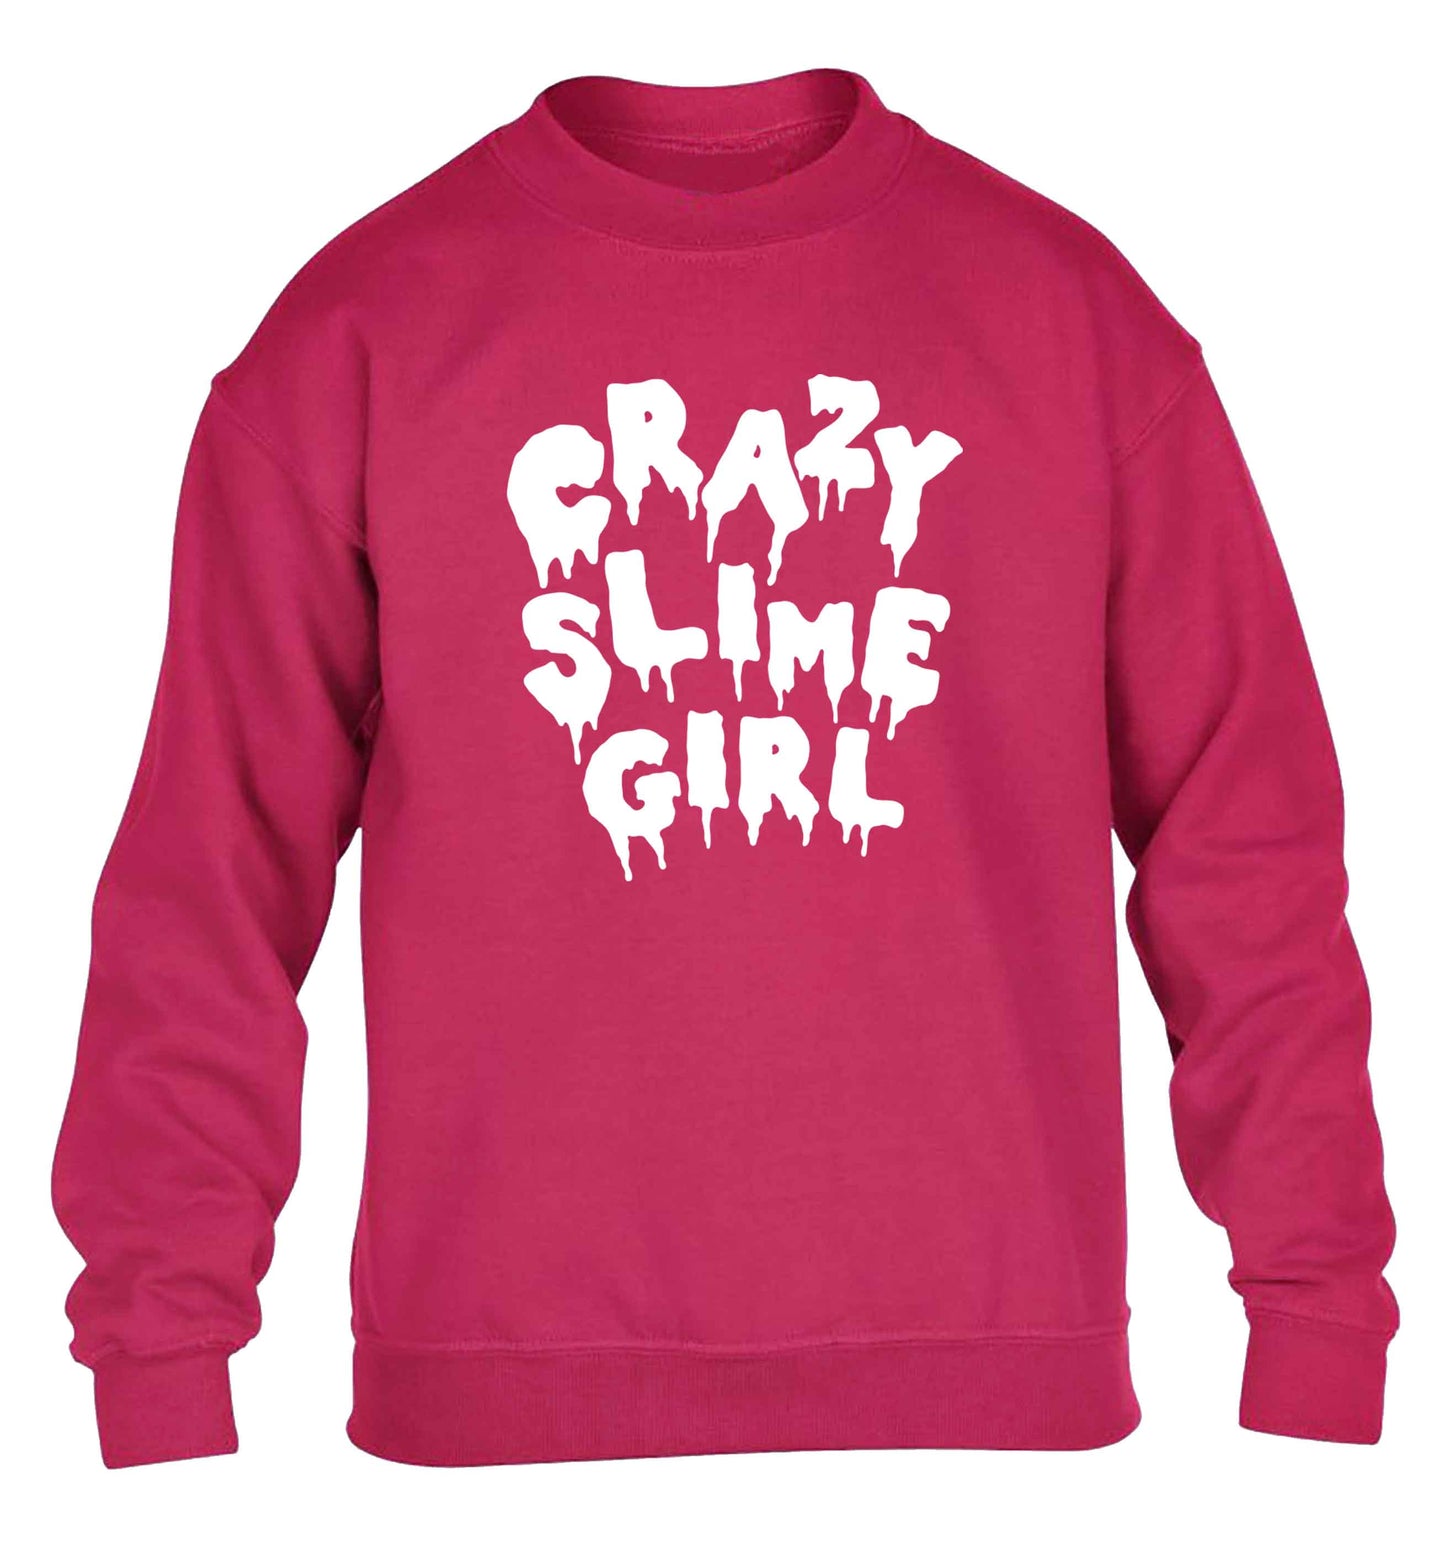 Crazy slime girl children's pink sweater 12-13 Years